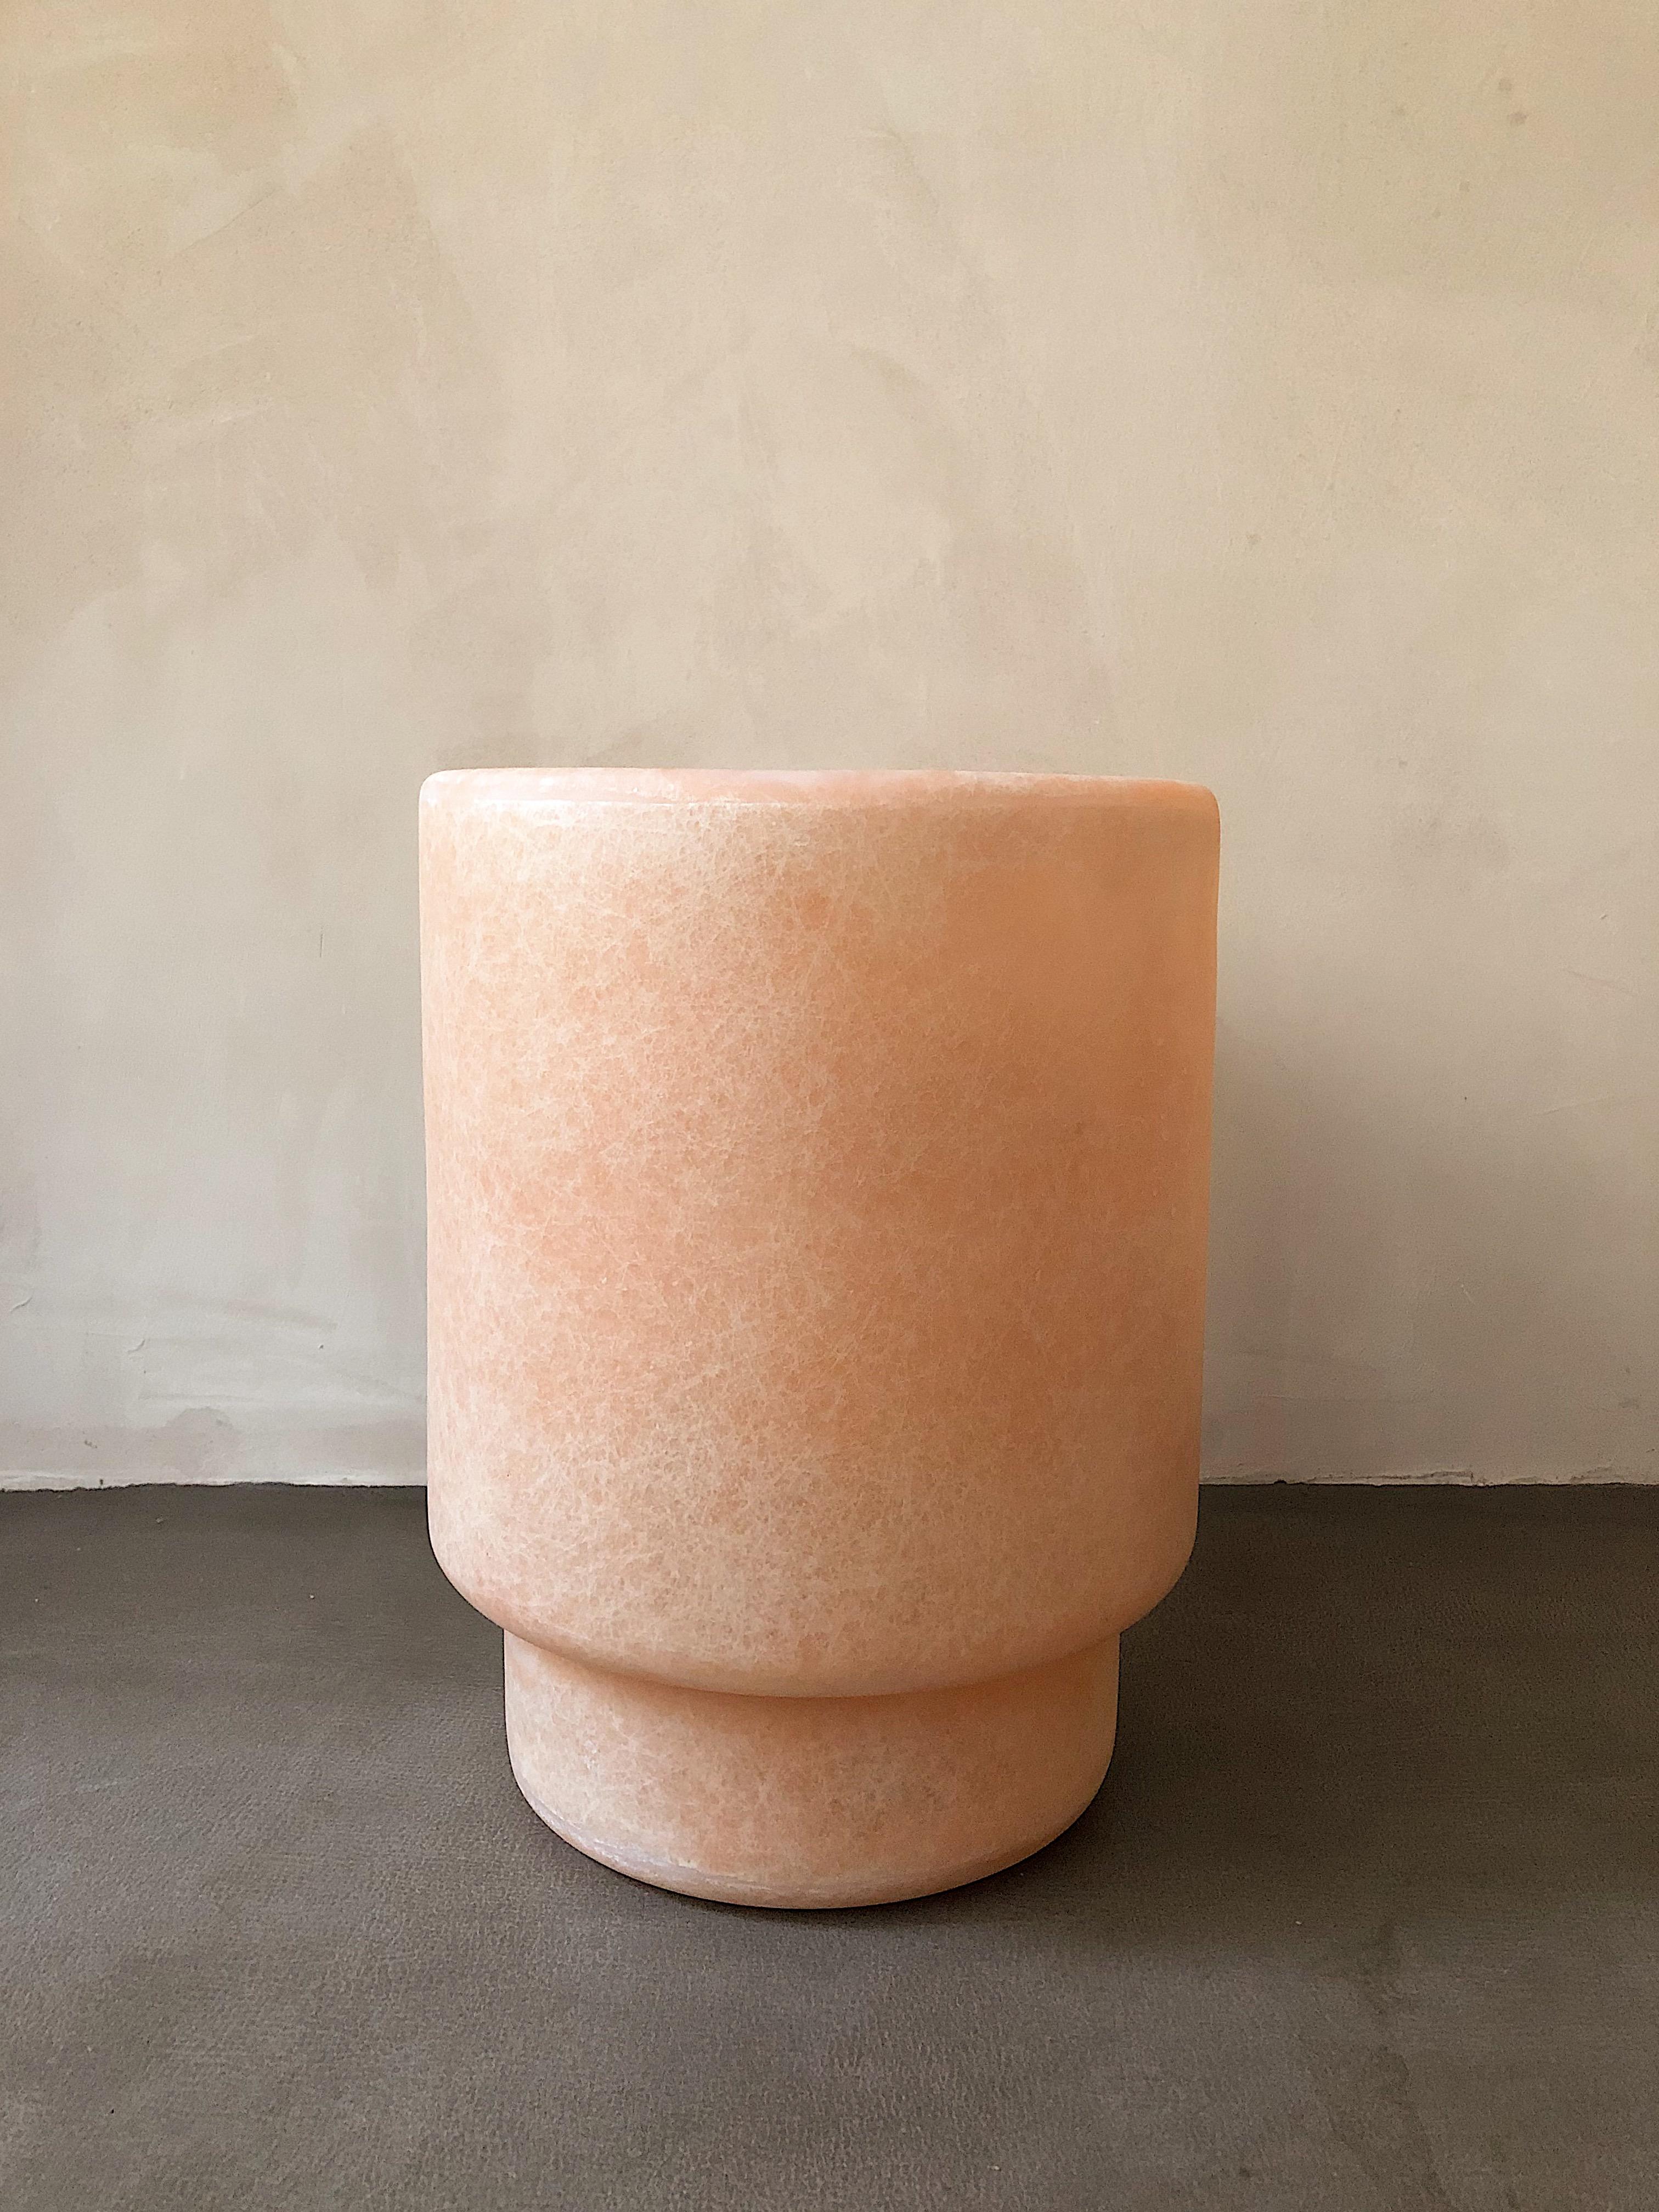 Tong pink vase by kar
Materials: FRP
Dimensions: 26 x 26 x 34 cm

*This piece is suitable for outdoor use.

A smooth shape for integrating into any space. Multiple-use as a flower vase, a container for blueprints, posters, or as it originally